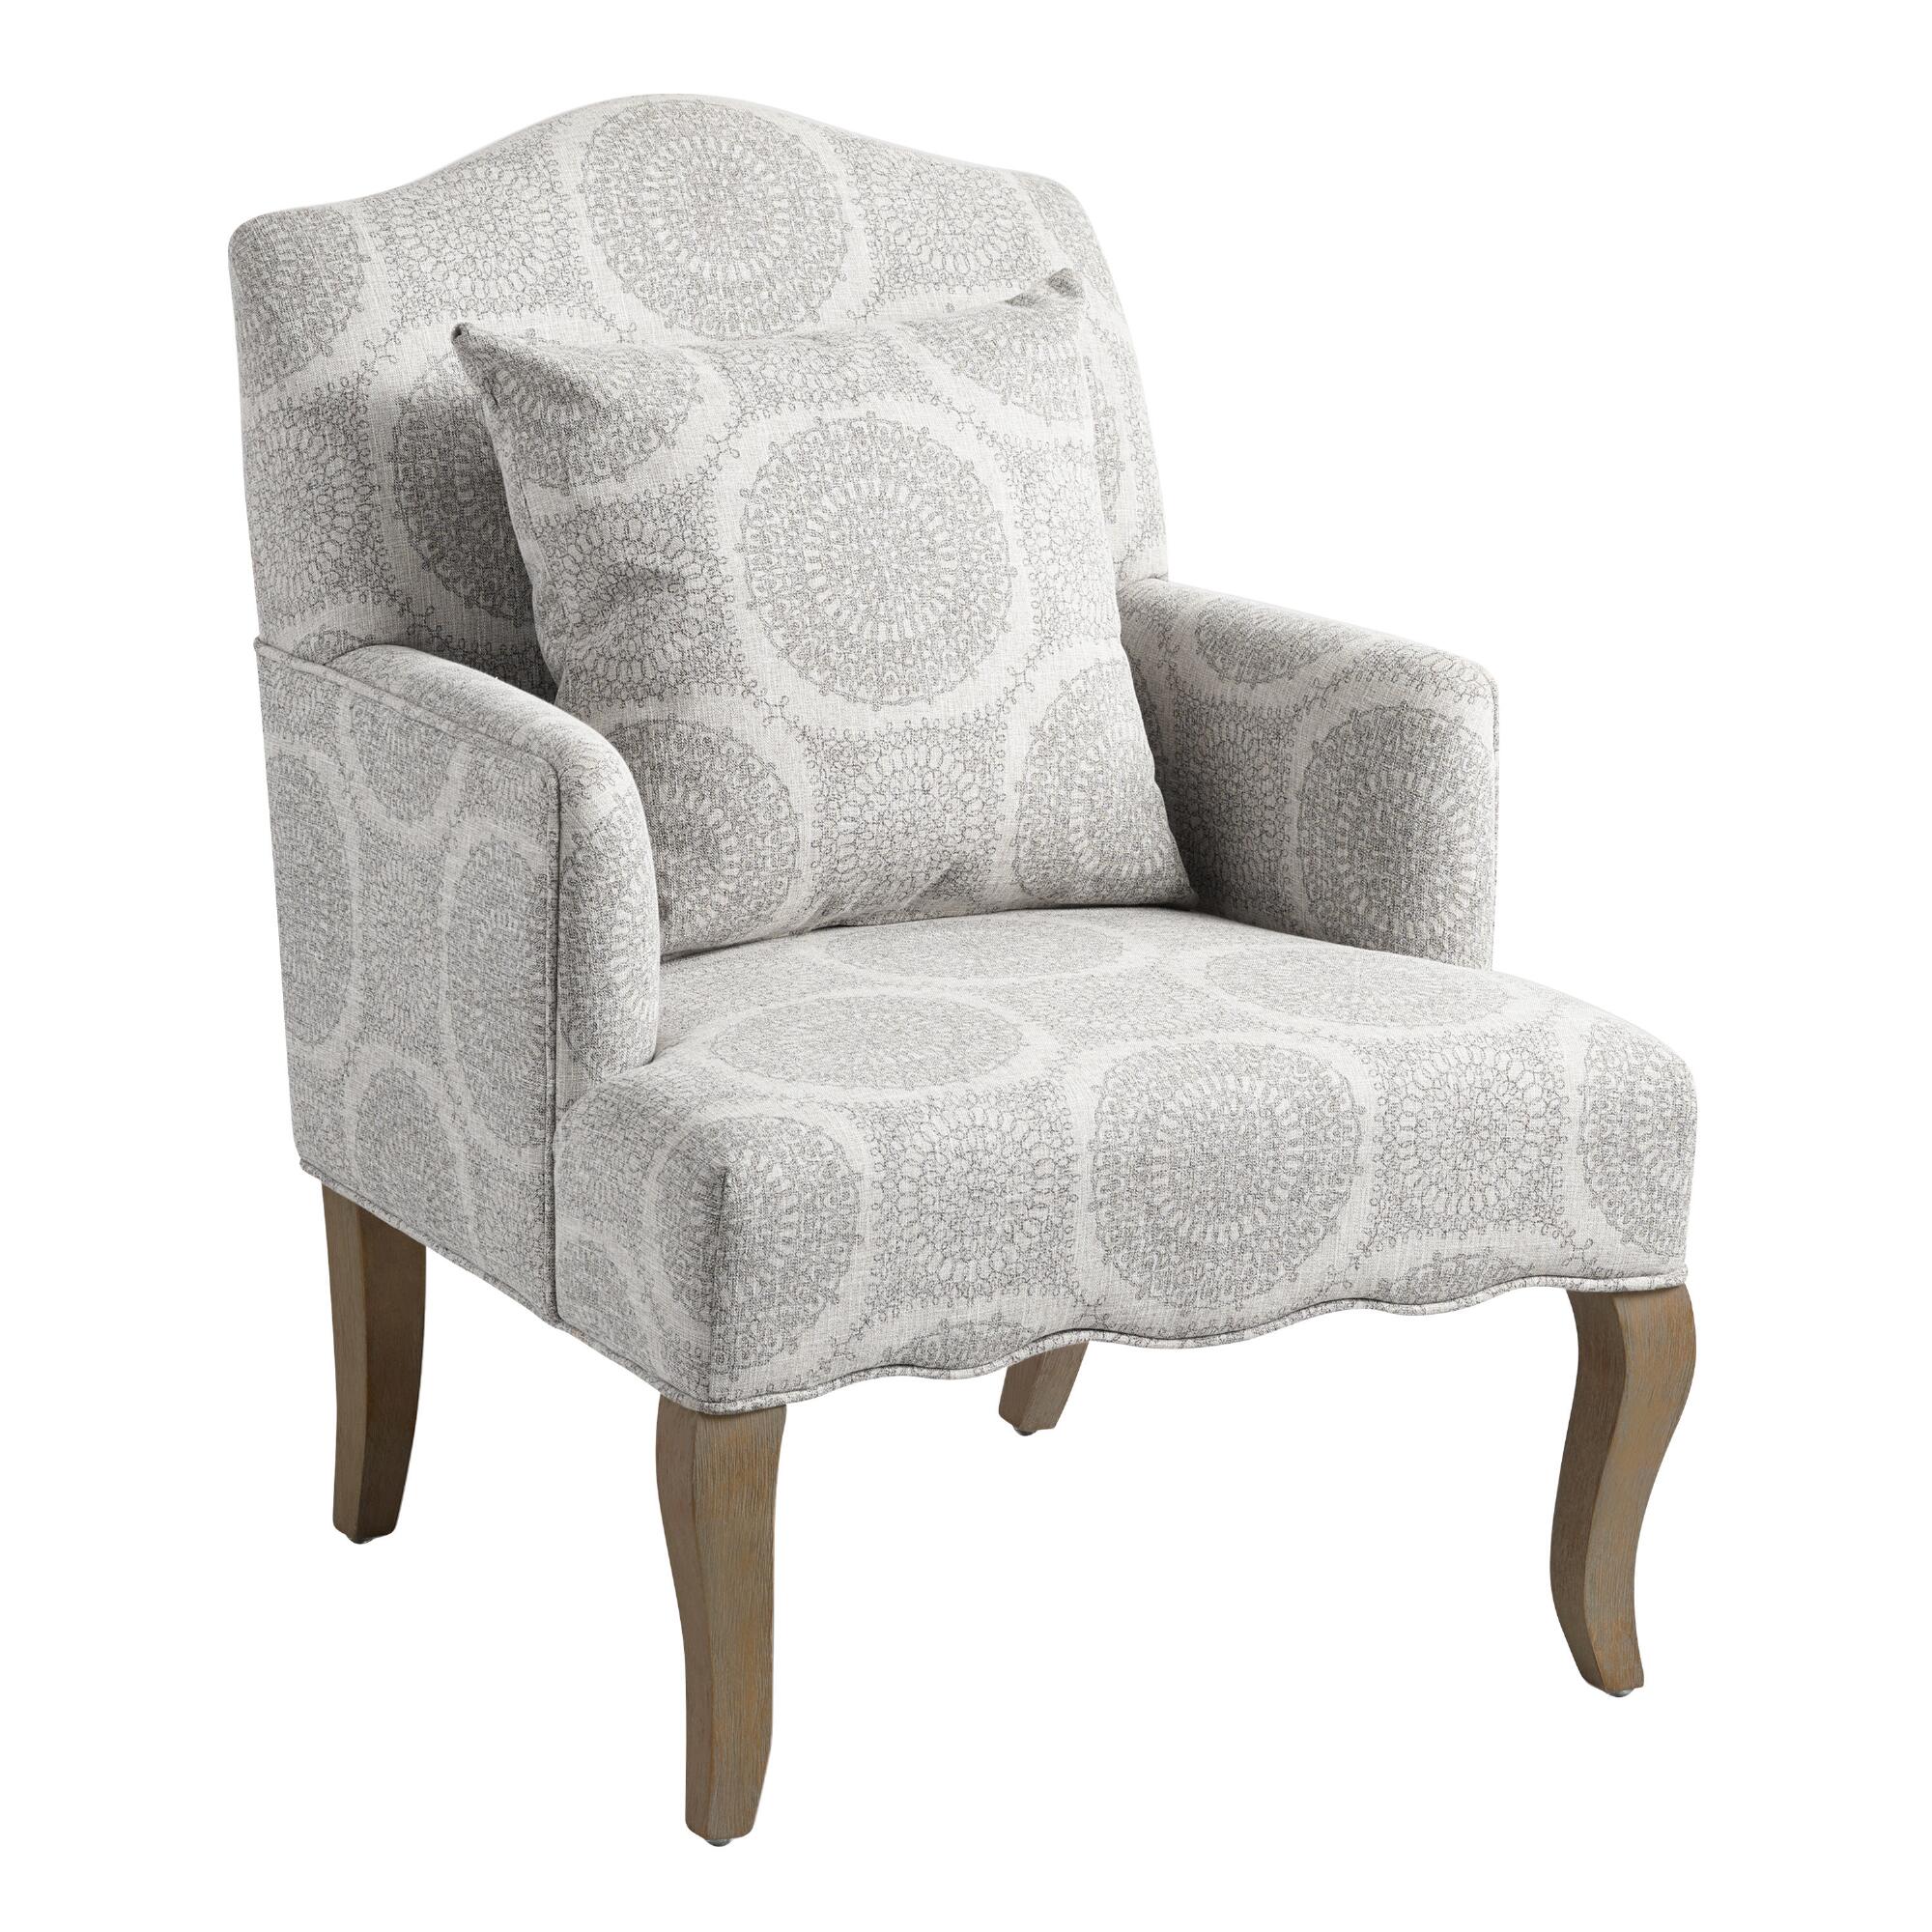 Gray Medallion Davenport Upholstered Armchair with Pillow: Brown/Natural by World Market